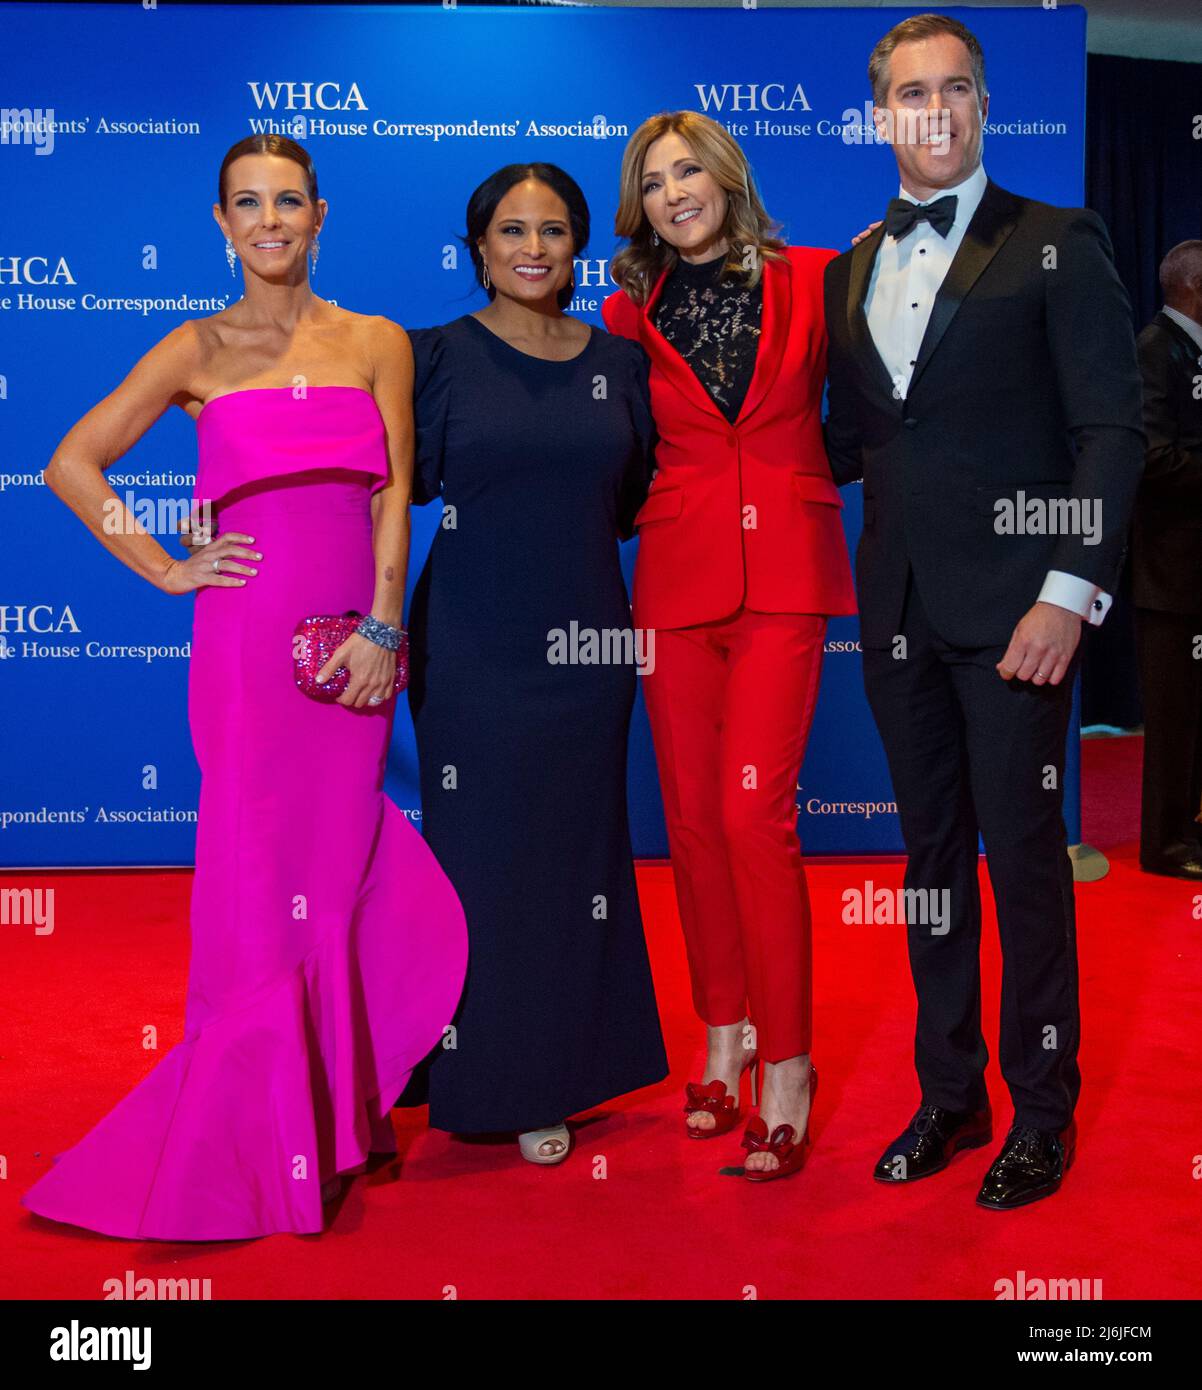 Stephanie Ruhle, left, Kristen Welker, second from left, Chris Jansing, second from right, and Peter Alexander, right, arrive for the 2022 White House Correspondents Association Annual Dinner at the Washington Hilton Hotel on Saturday, April 30, 2022.  This is the first time since 2019 that the WHCA has held its annual dinner due to the COVID-19 pandemic. Credit: Rod Lamkey / CNP /MediaPunch Stock Photo